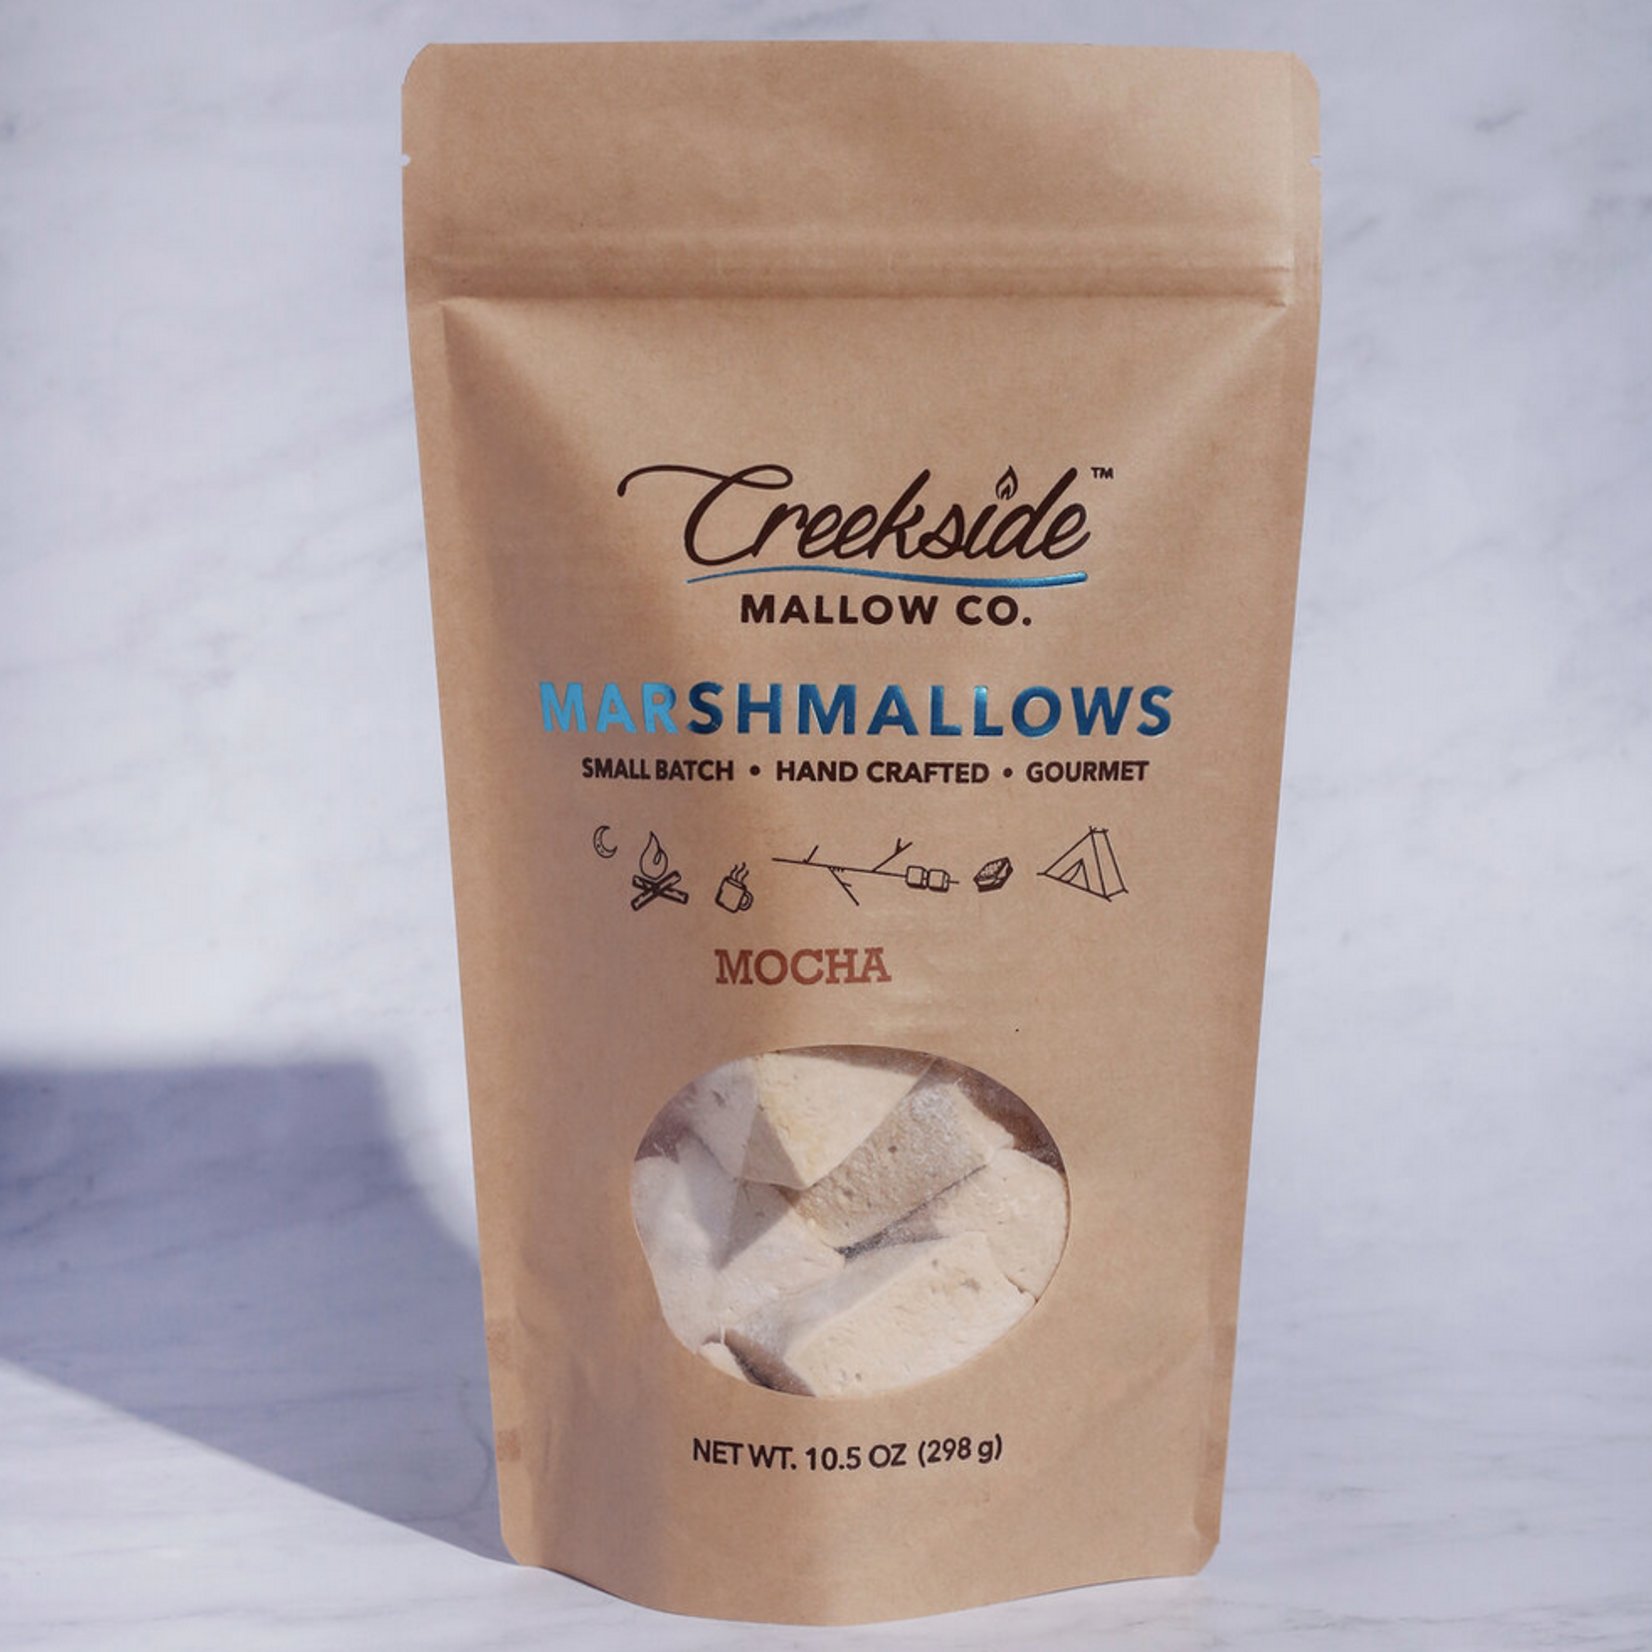 Creekside Mallow Co. / Fireside Mallow Co. 12ct. Marshmallow Bags